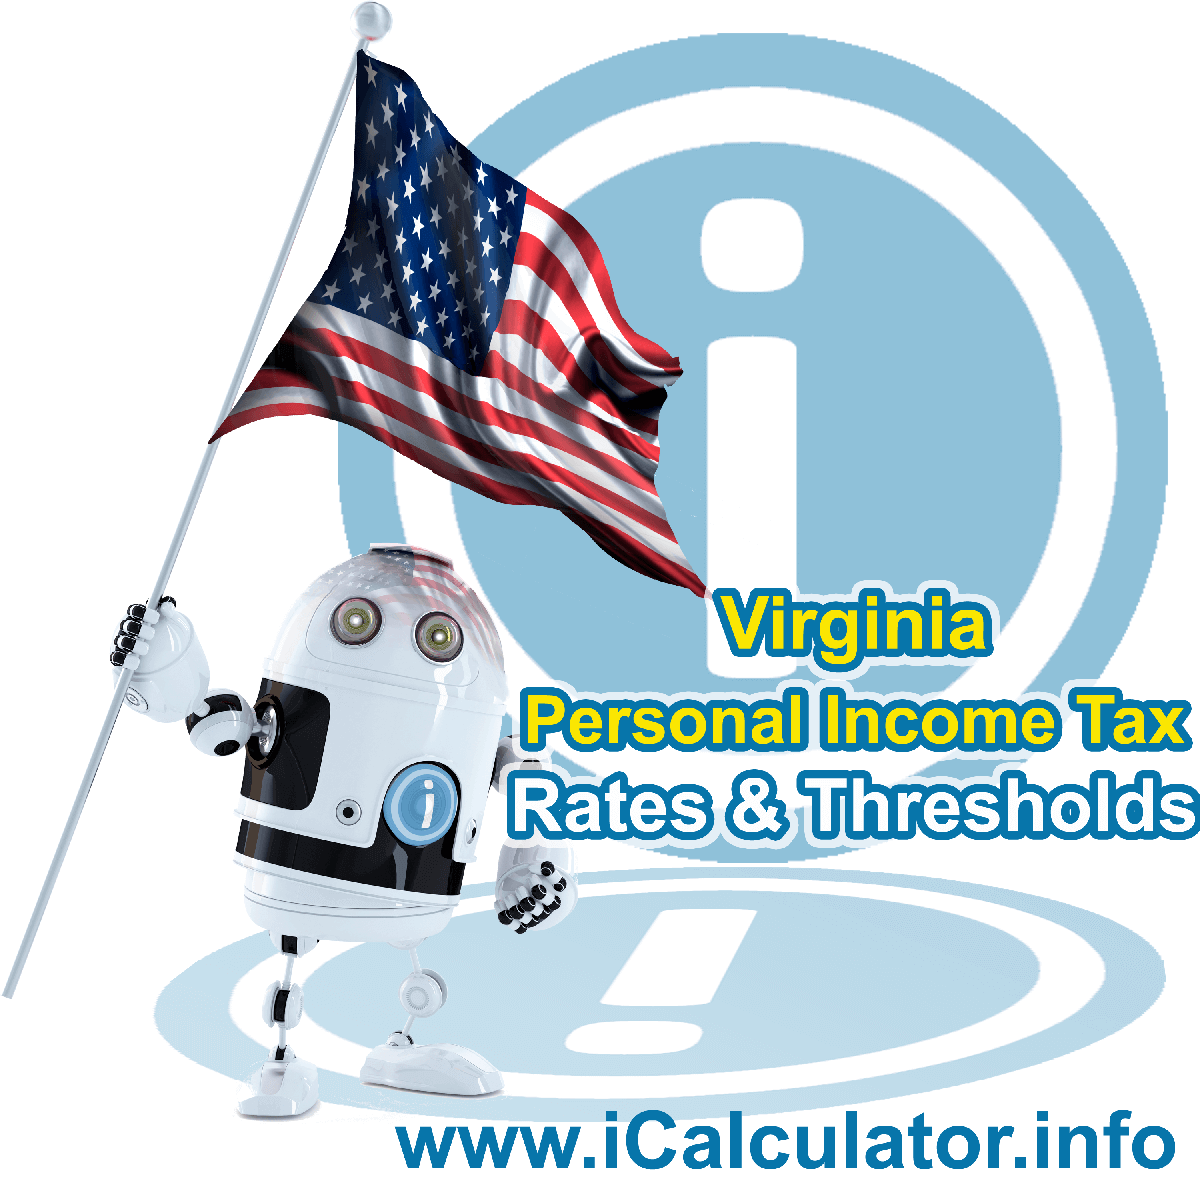 Virginia State Tax Tables 2017. This image displays details of the Virginia State Tax Tables for the 2017 tax return year which is provided in support of the 2017 US Tax Calculator